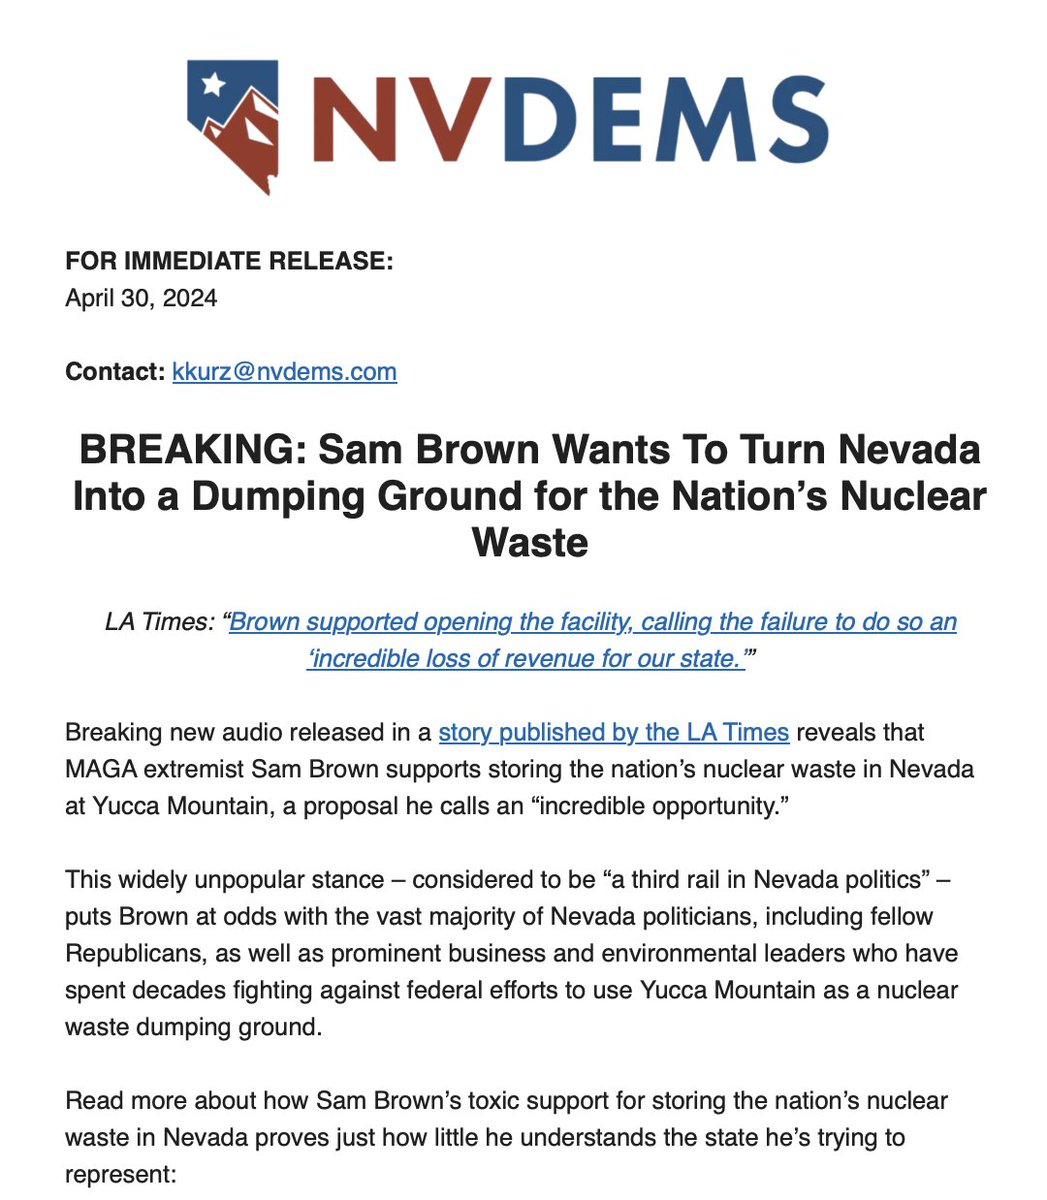 Harry Reid would be pleased to see his NV Dems continue to weaponize Yucca Mountain -- though some might argue it conflicts with Dems' policy goals around green energy by discouraging nuclear.